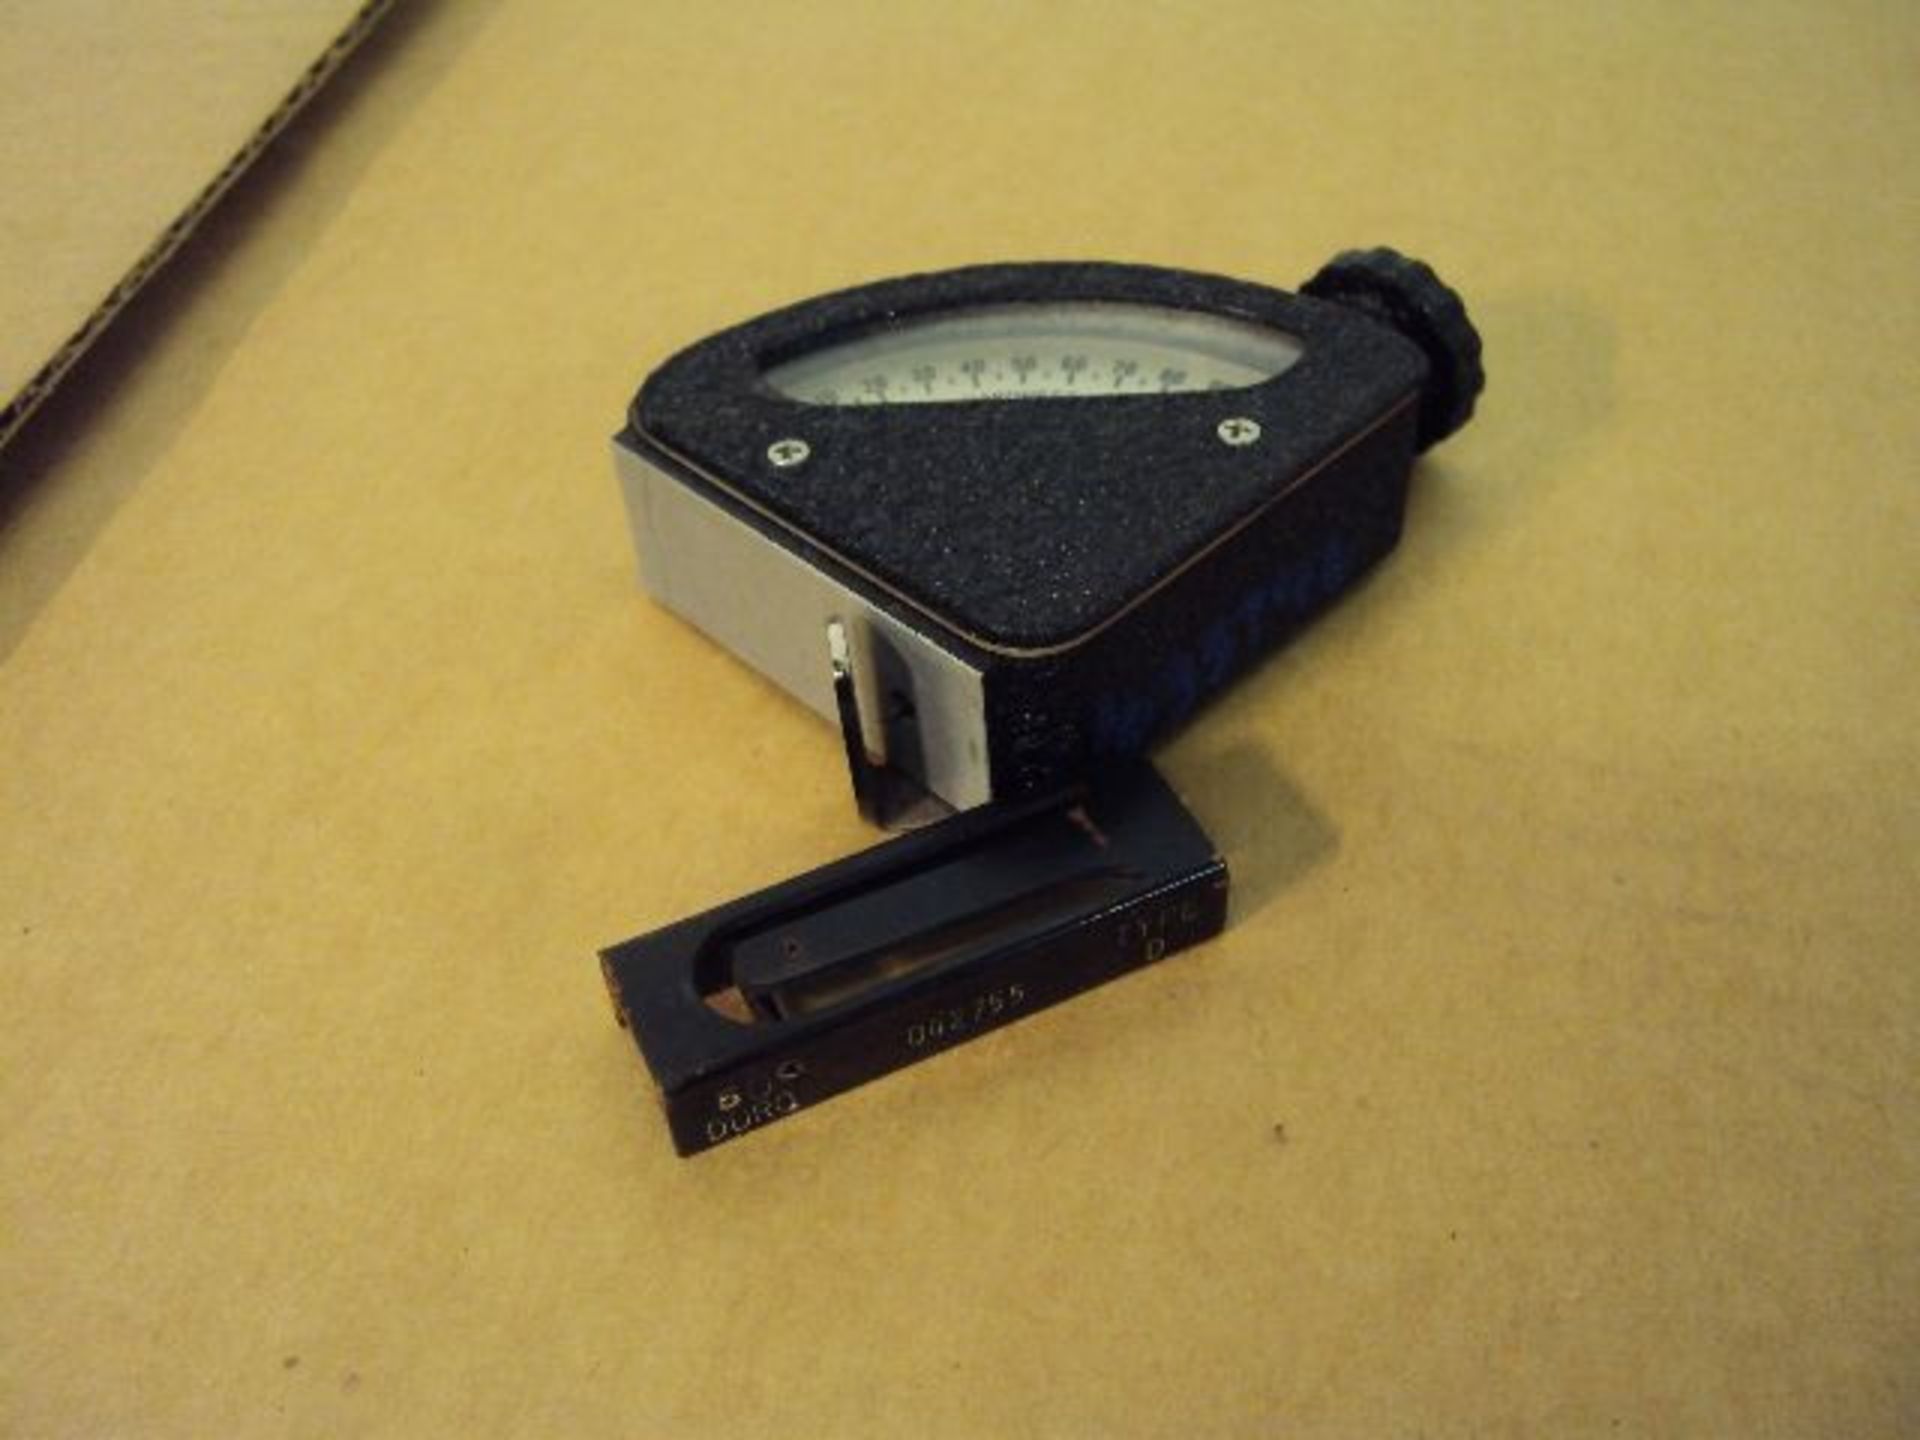 Shore Instrument Type D Durometer Hardness Tester with Test Standard in Leather Case - Image 4 of 5